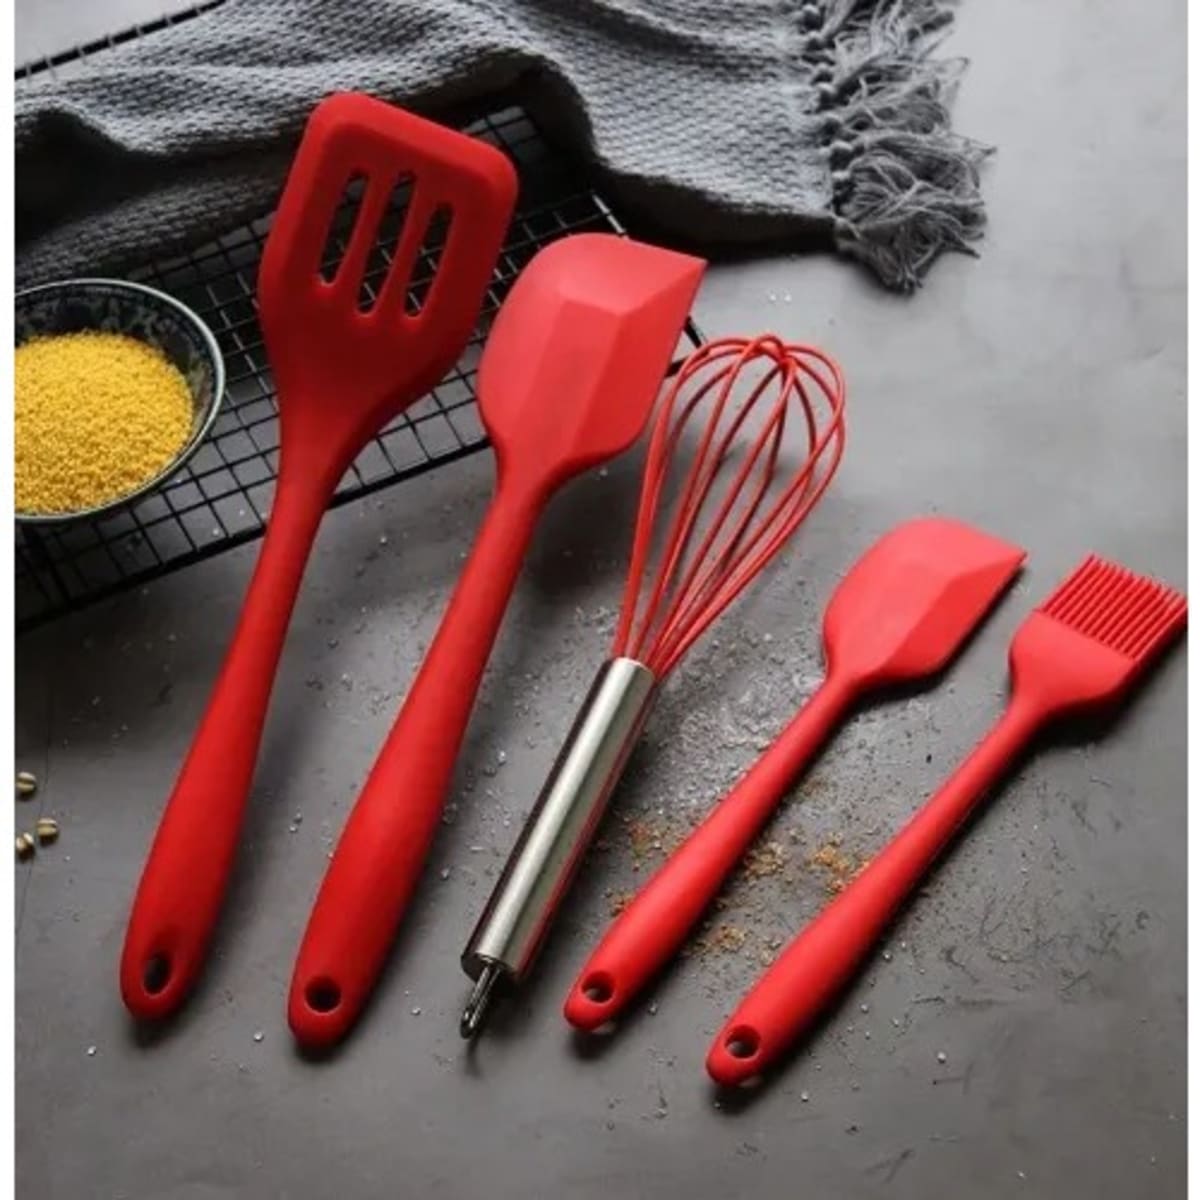 5-Piece Silicone Cooking Tools